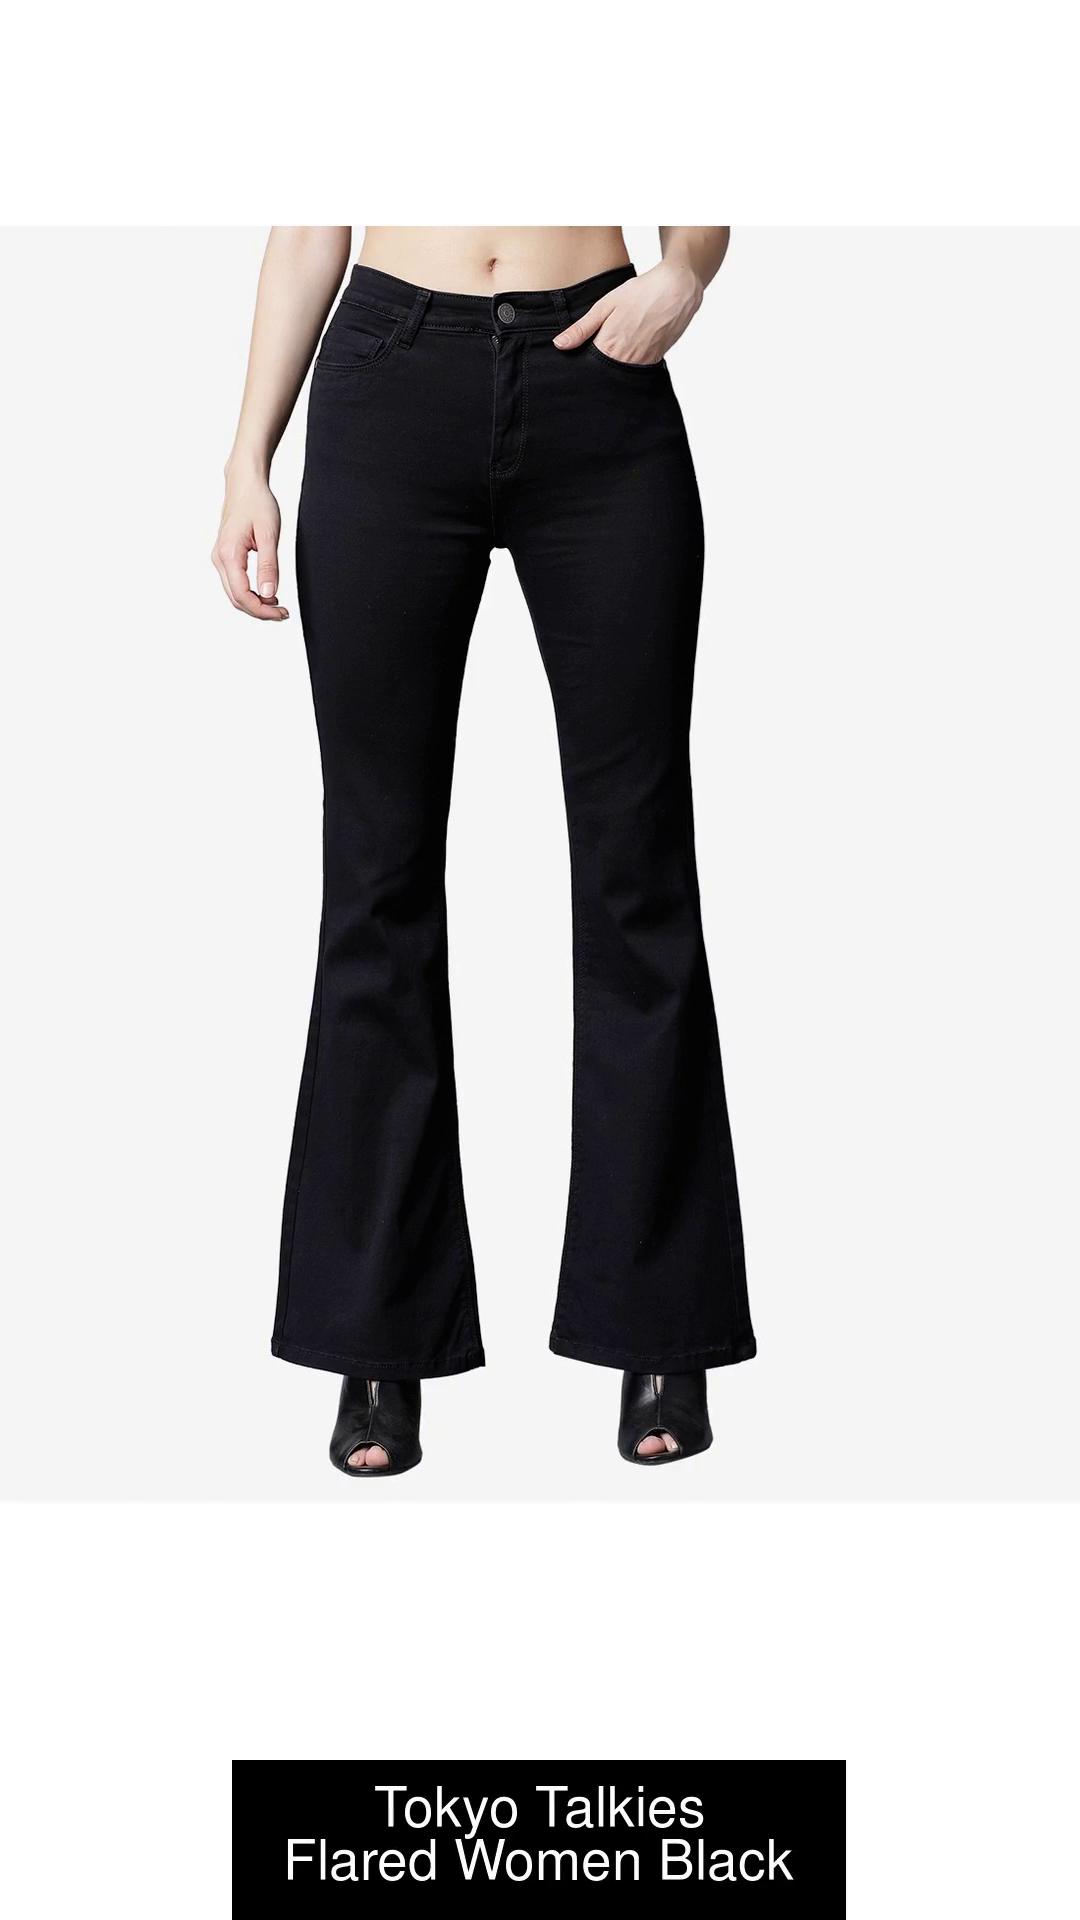 Tokyo Talkies Flared Women Black Jeans - Buy Tokyo Talkies Flared Women Black  Jeans Online at Best Prices in India